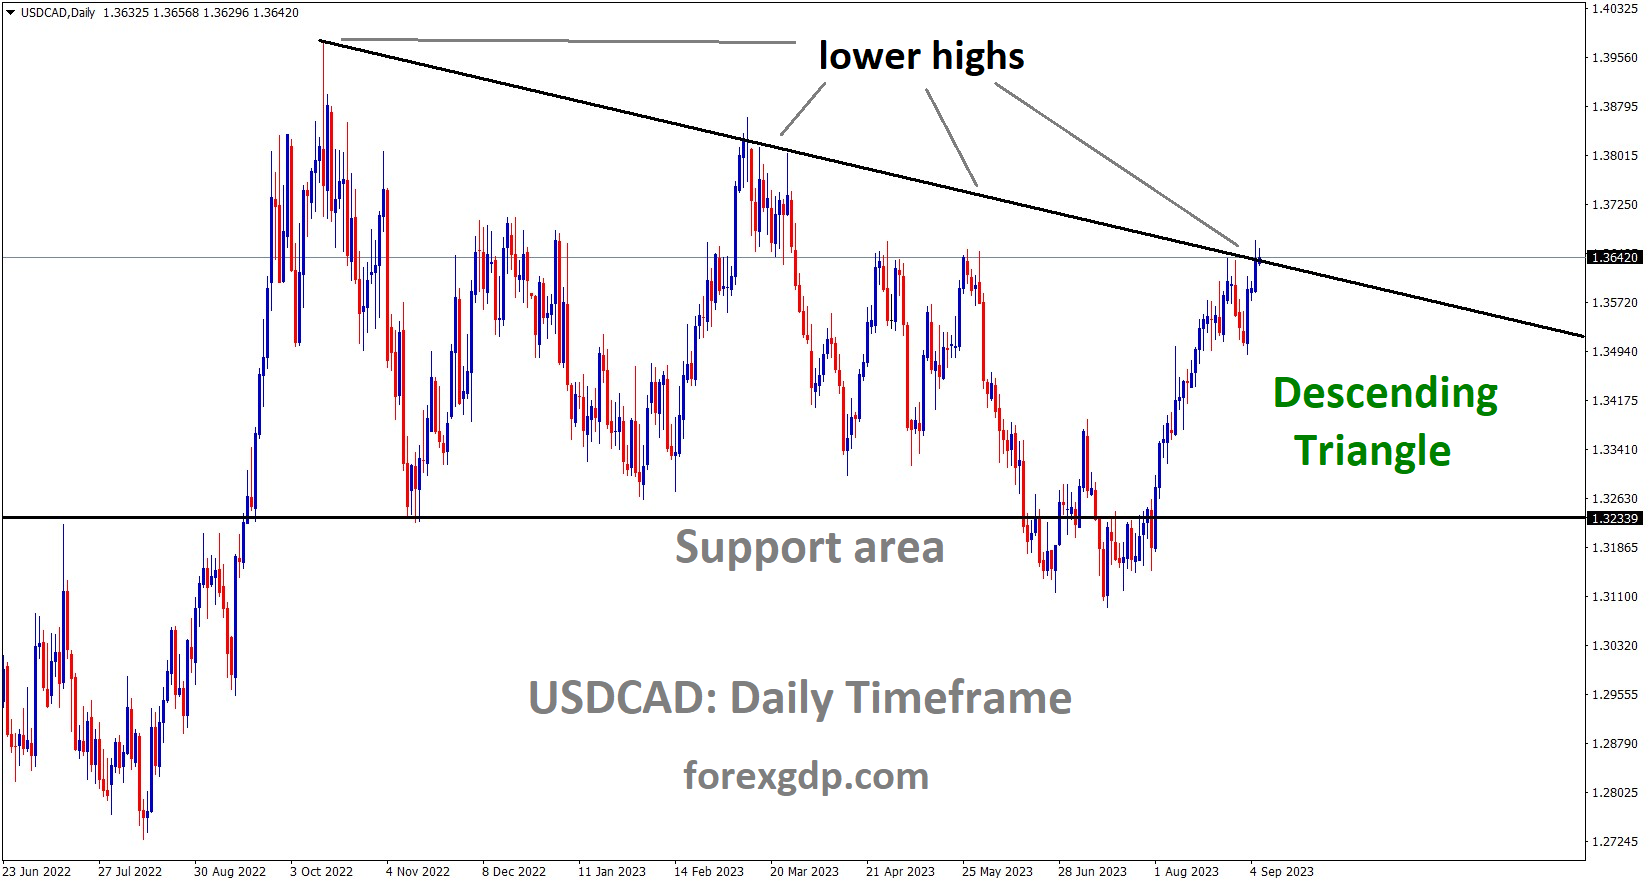 USDCAD Daily TF Analysis Market is moving in the Descending triangle pattern and the market has reached the lower high area of the pattern